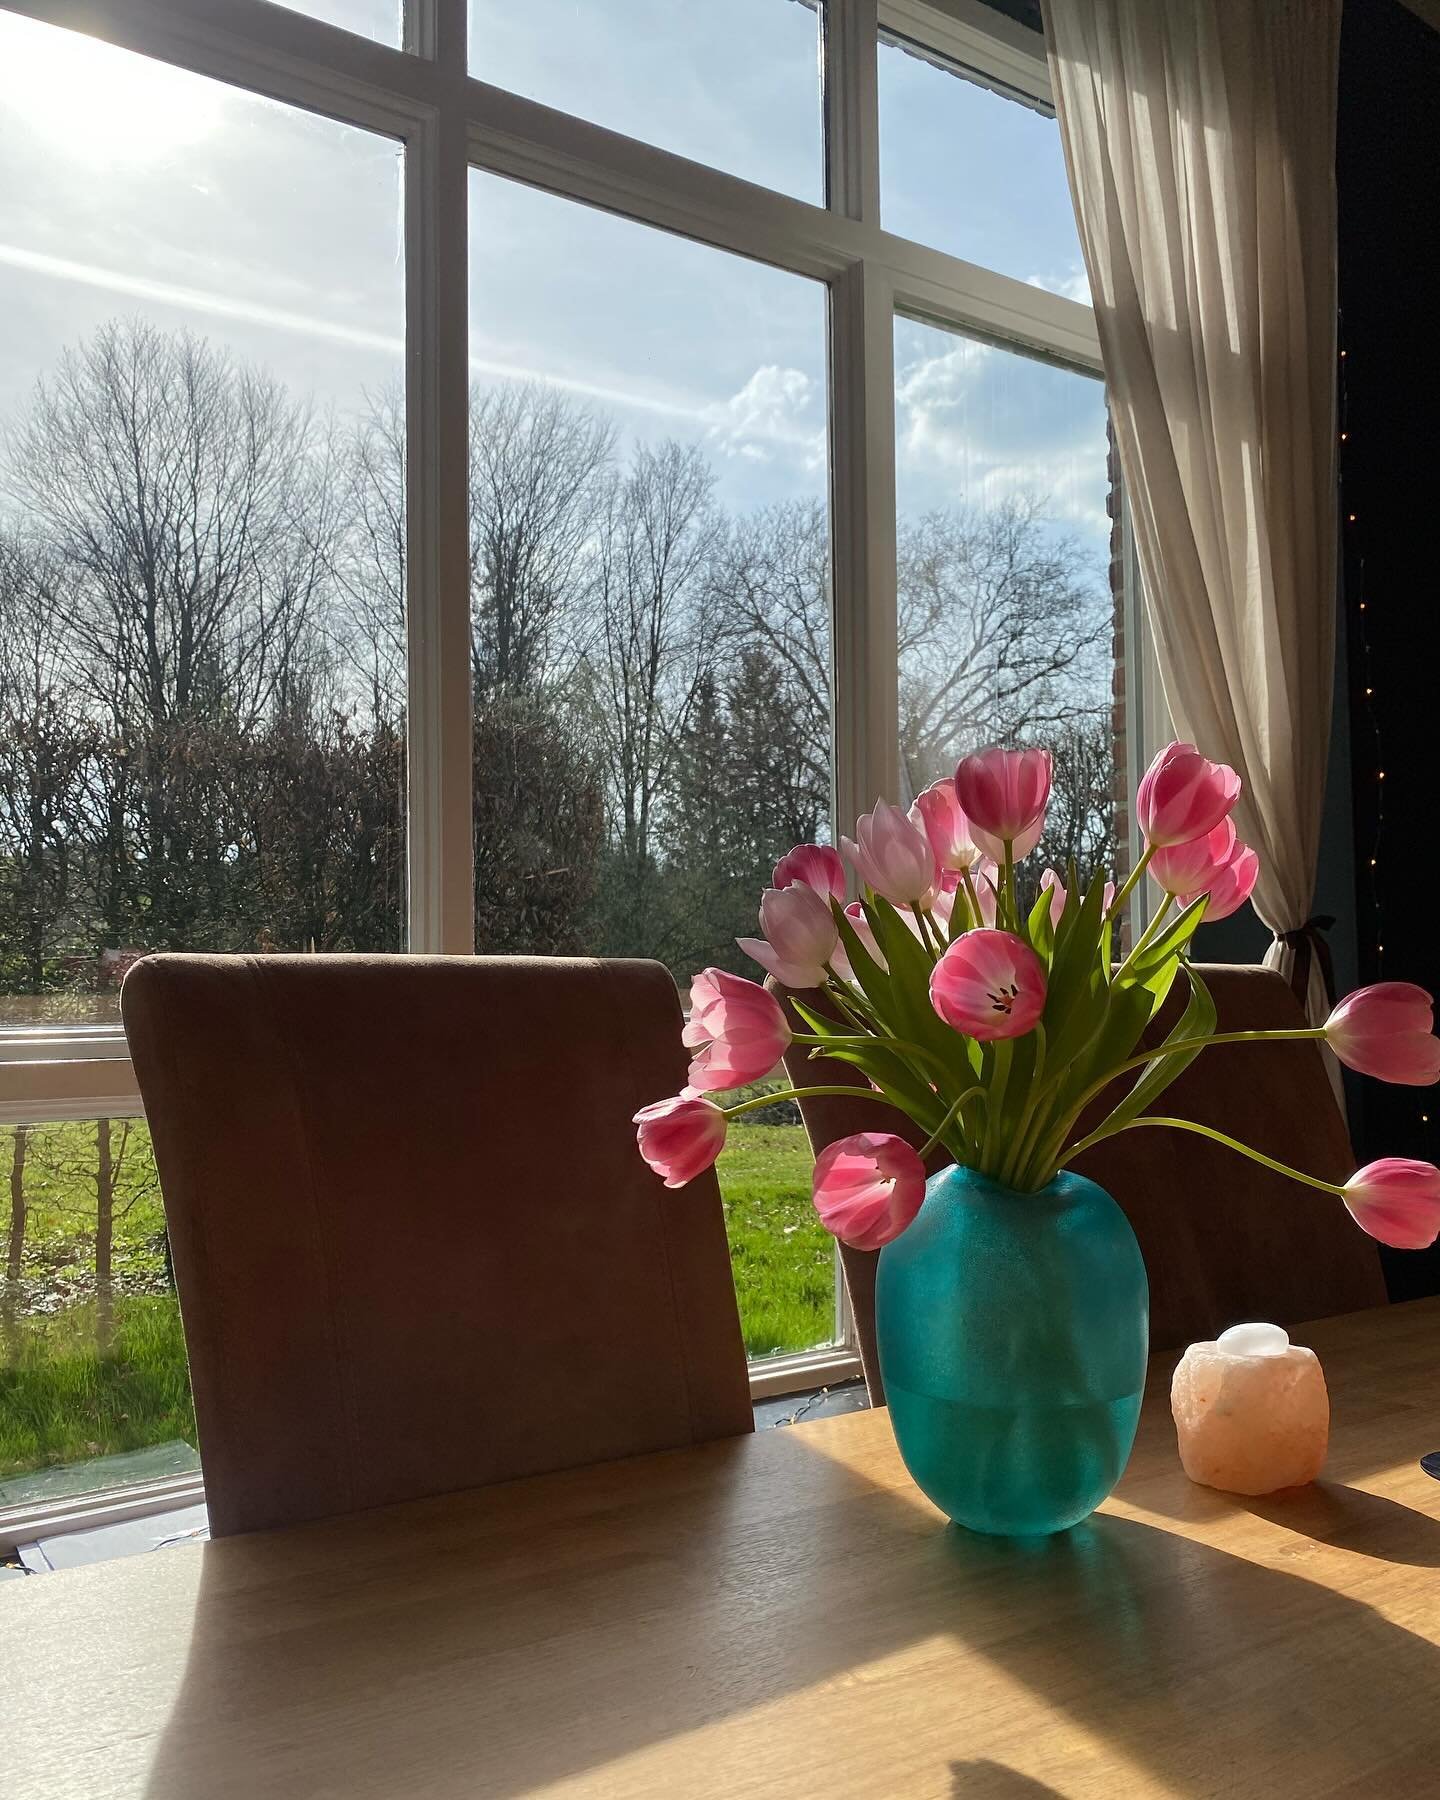 The coziness we provide our clients via great apartments in The Netherlands speaks for itself 💌

Comfycorner&rsquo;s team wish you a joyful spring 🌷